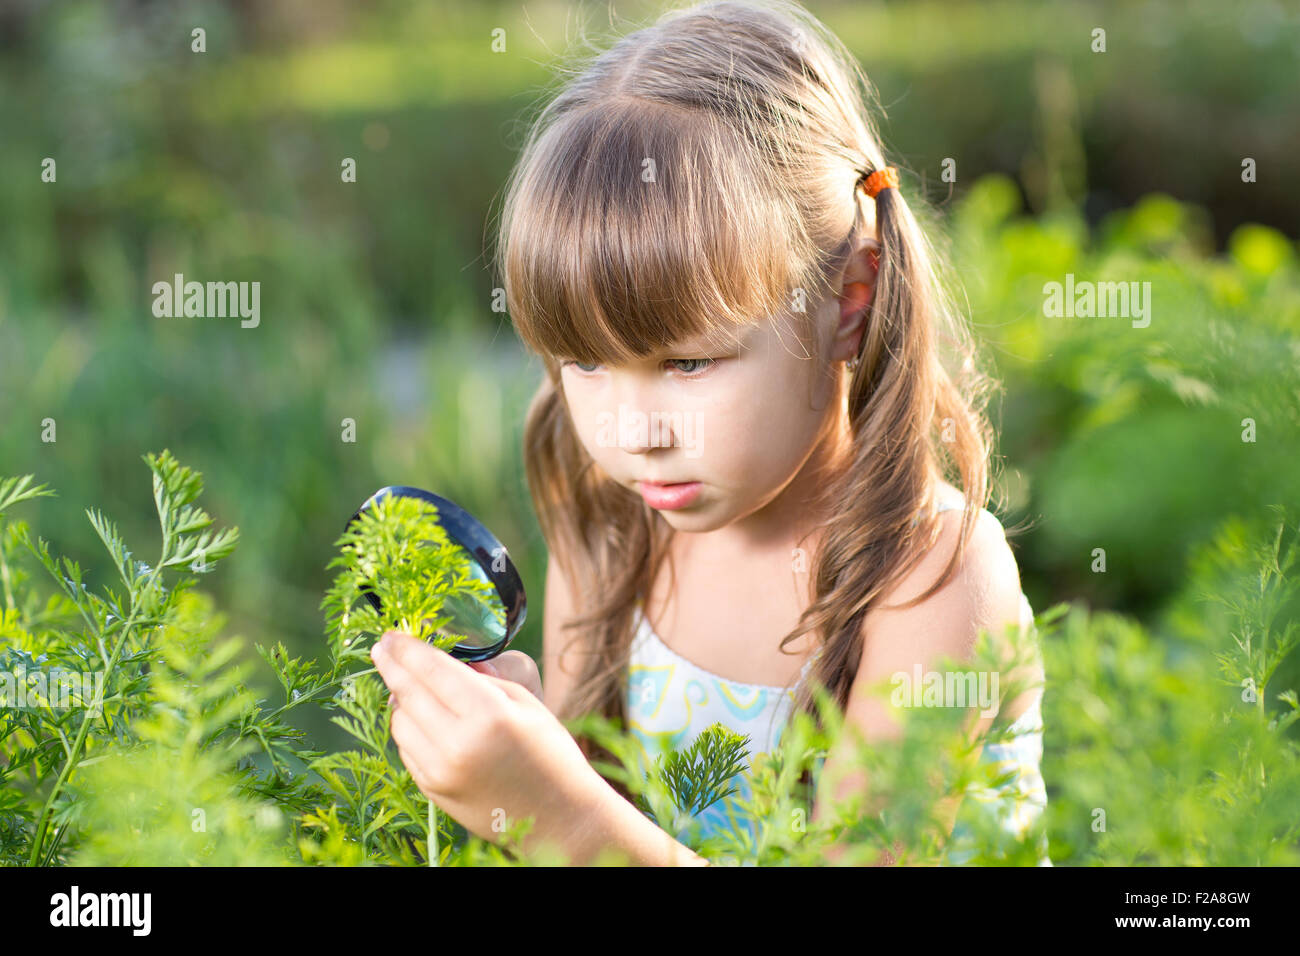 Child girl looking at halm leaves through magnifier outdoors Stock Photo